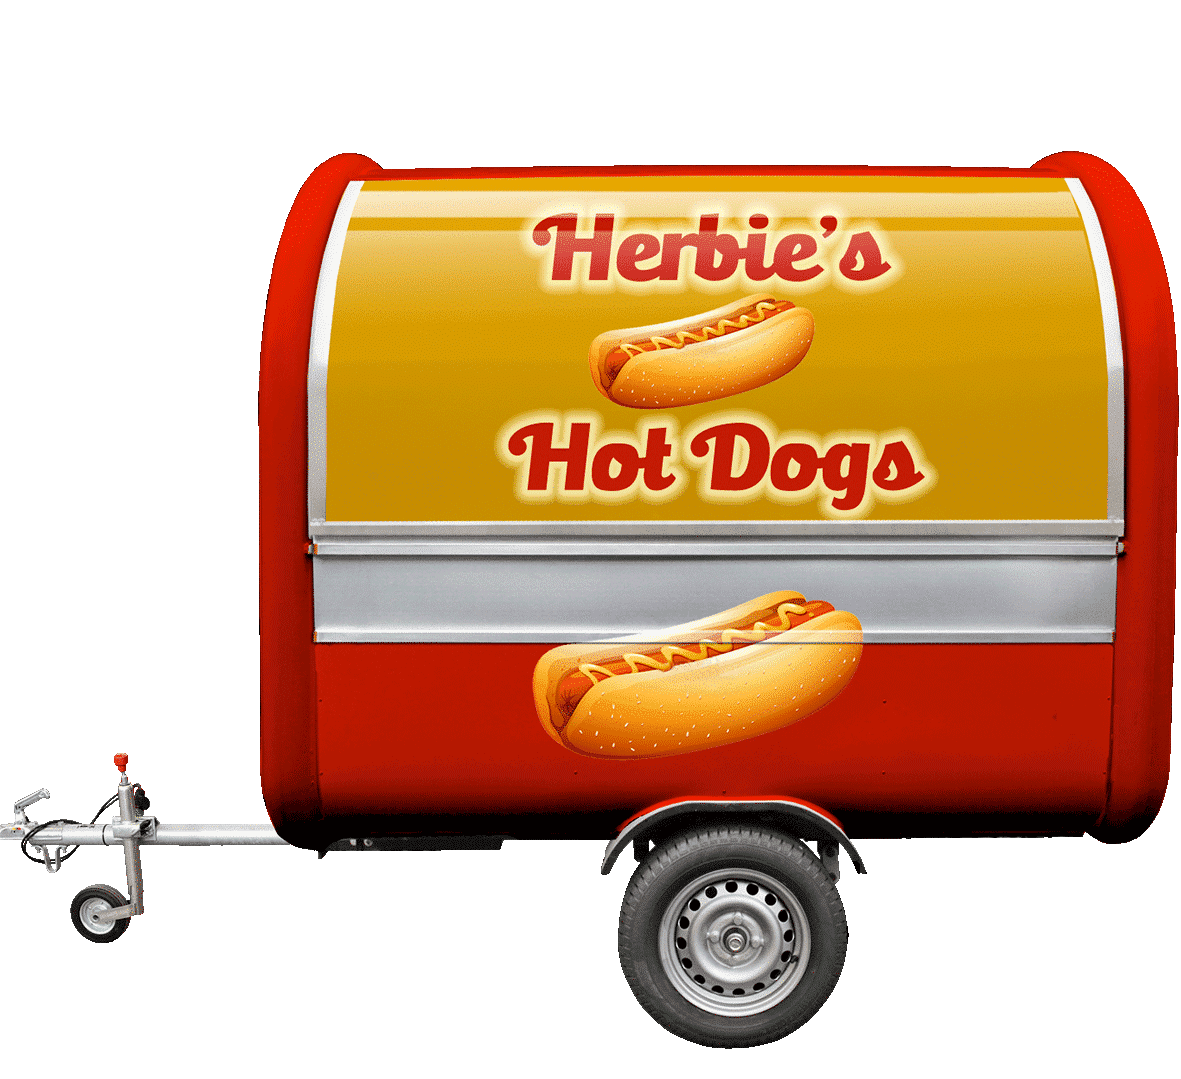 Hot-Dog-Stand